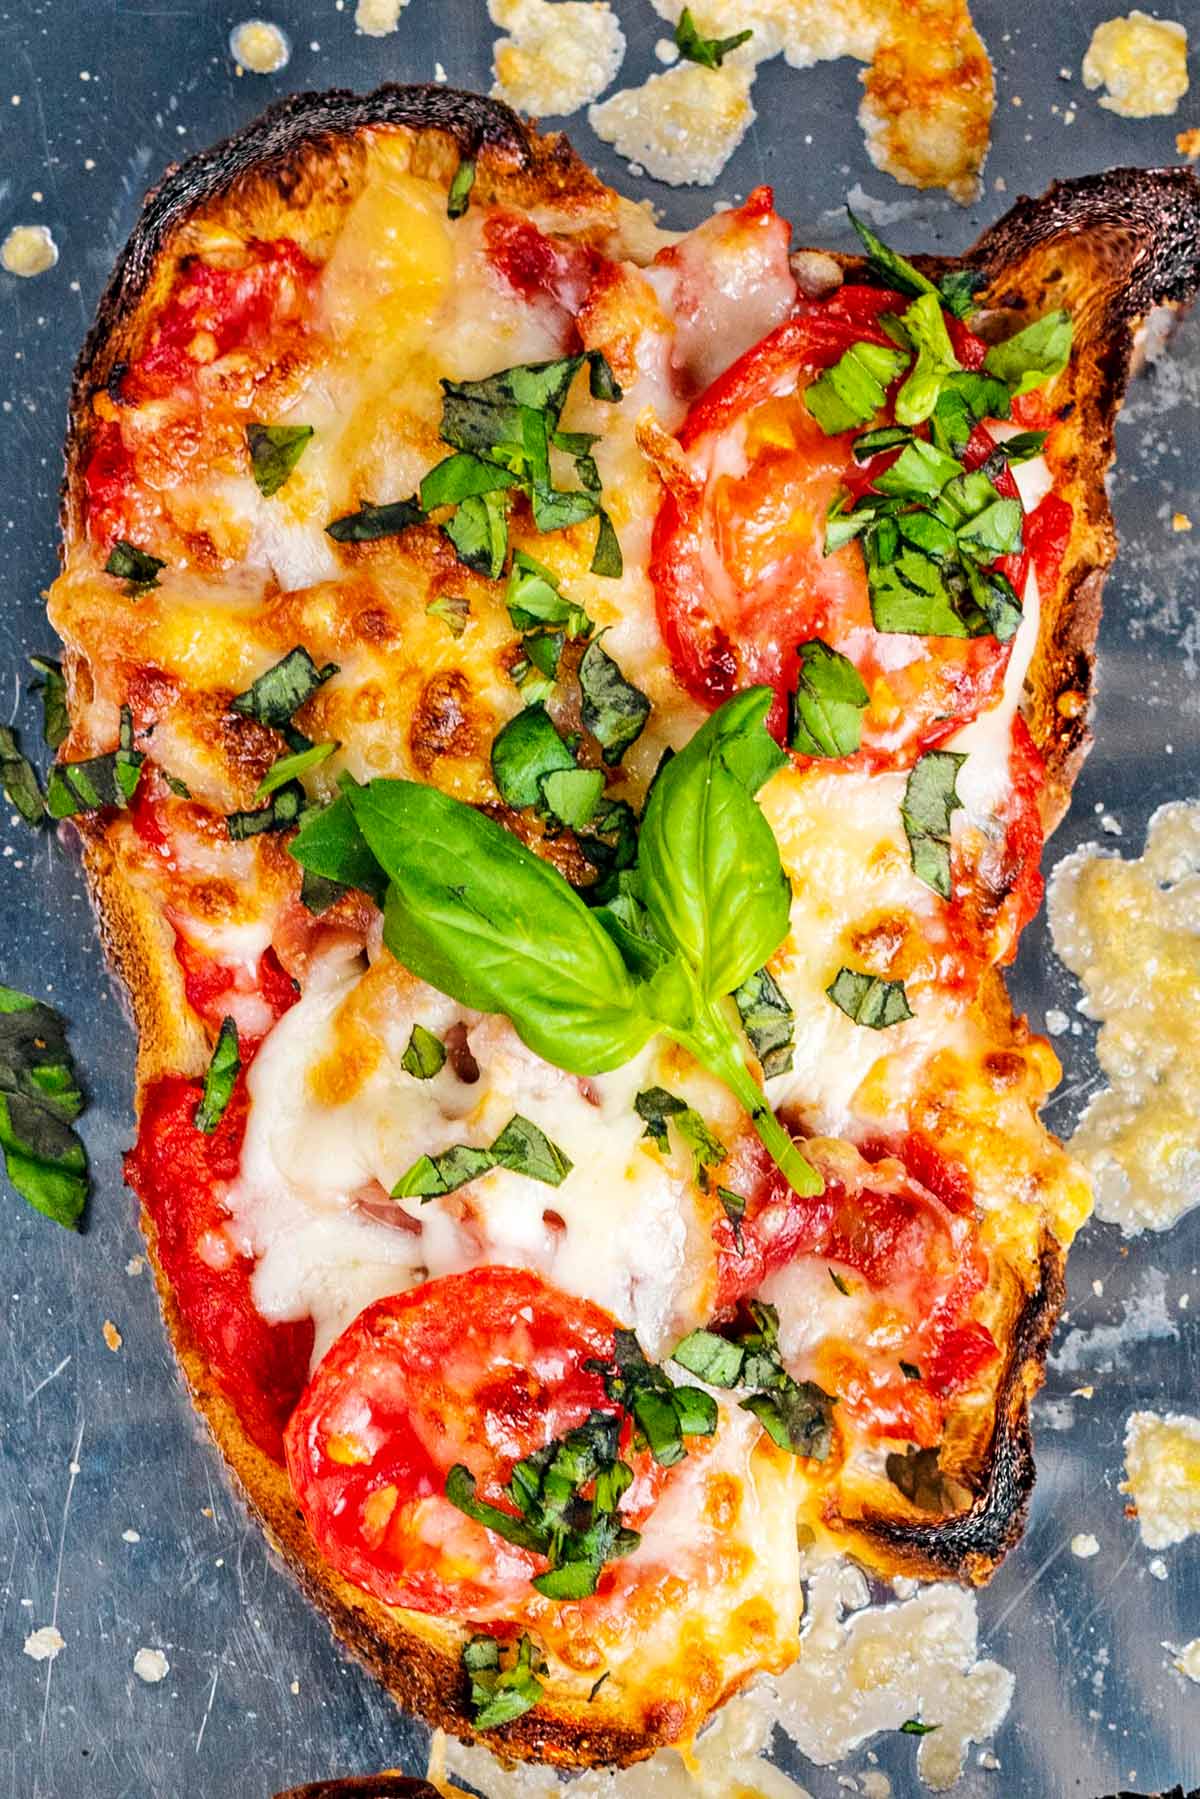 Melted cheese and tomatoes on toast with some basil leaves.